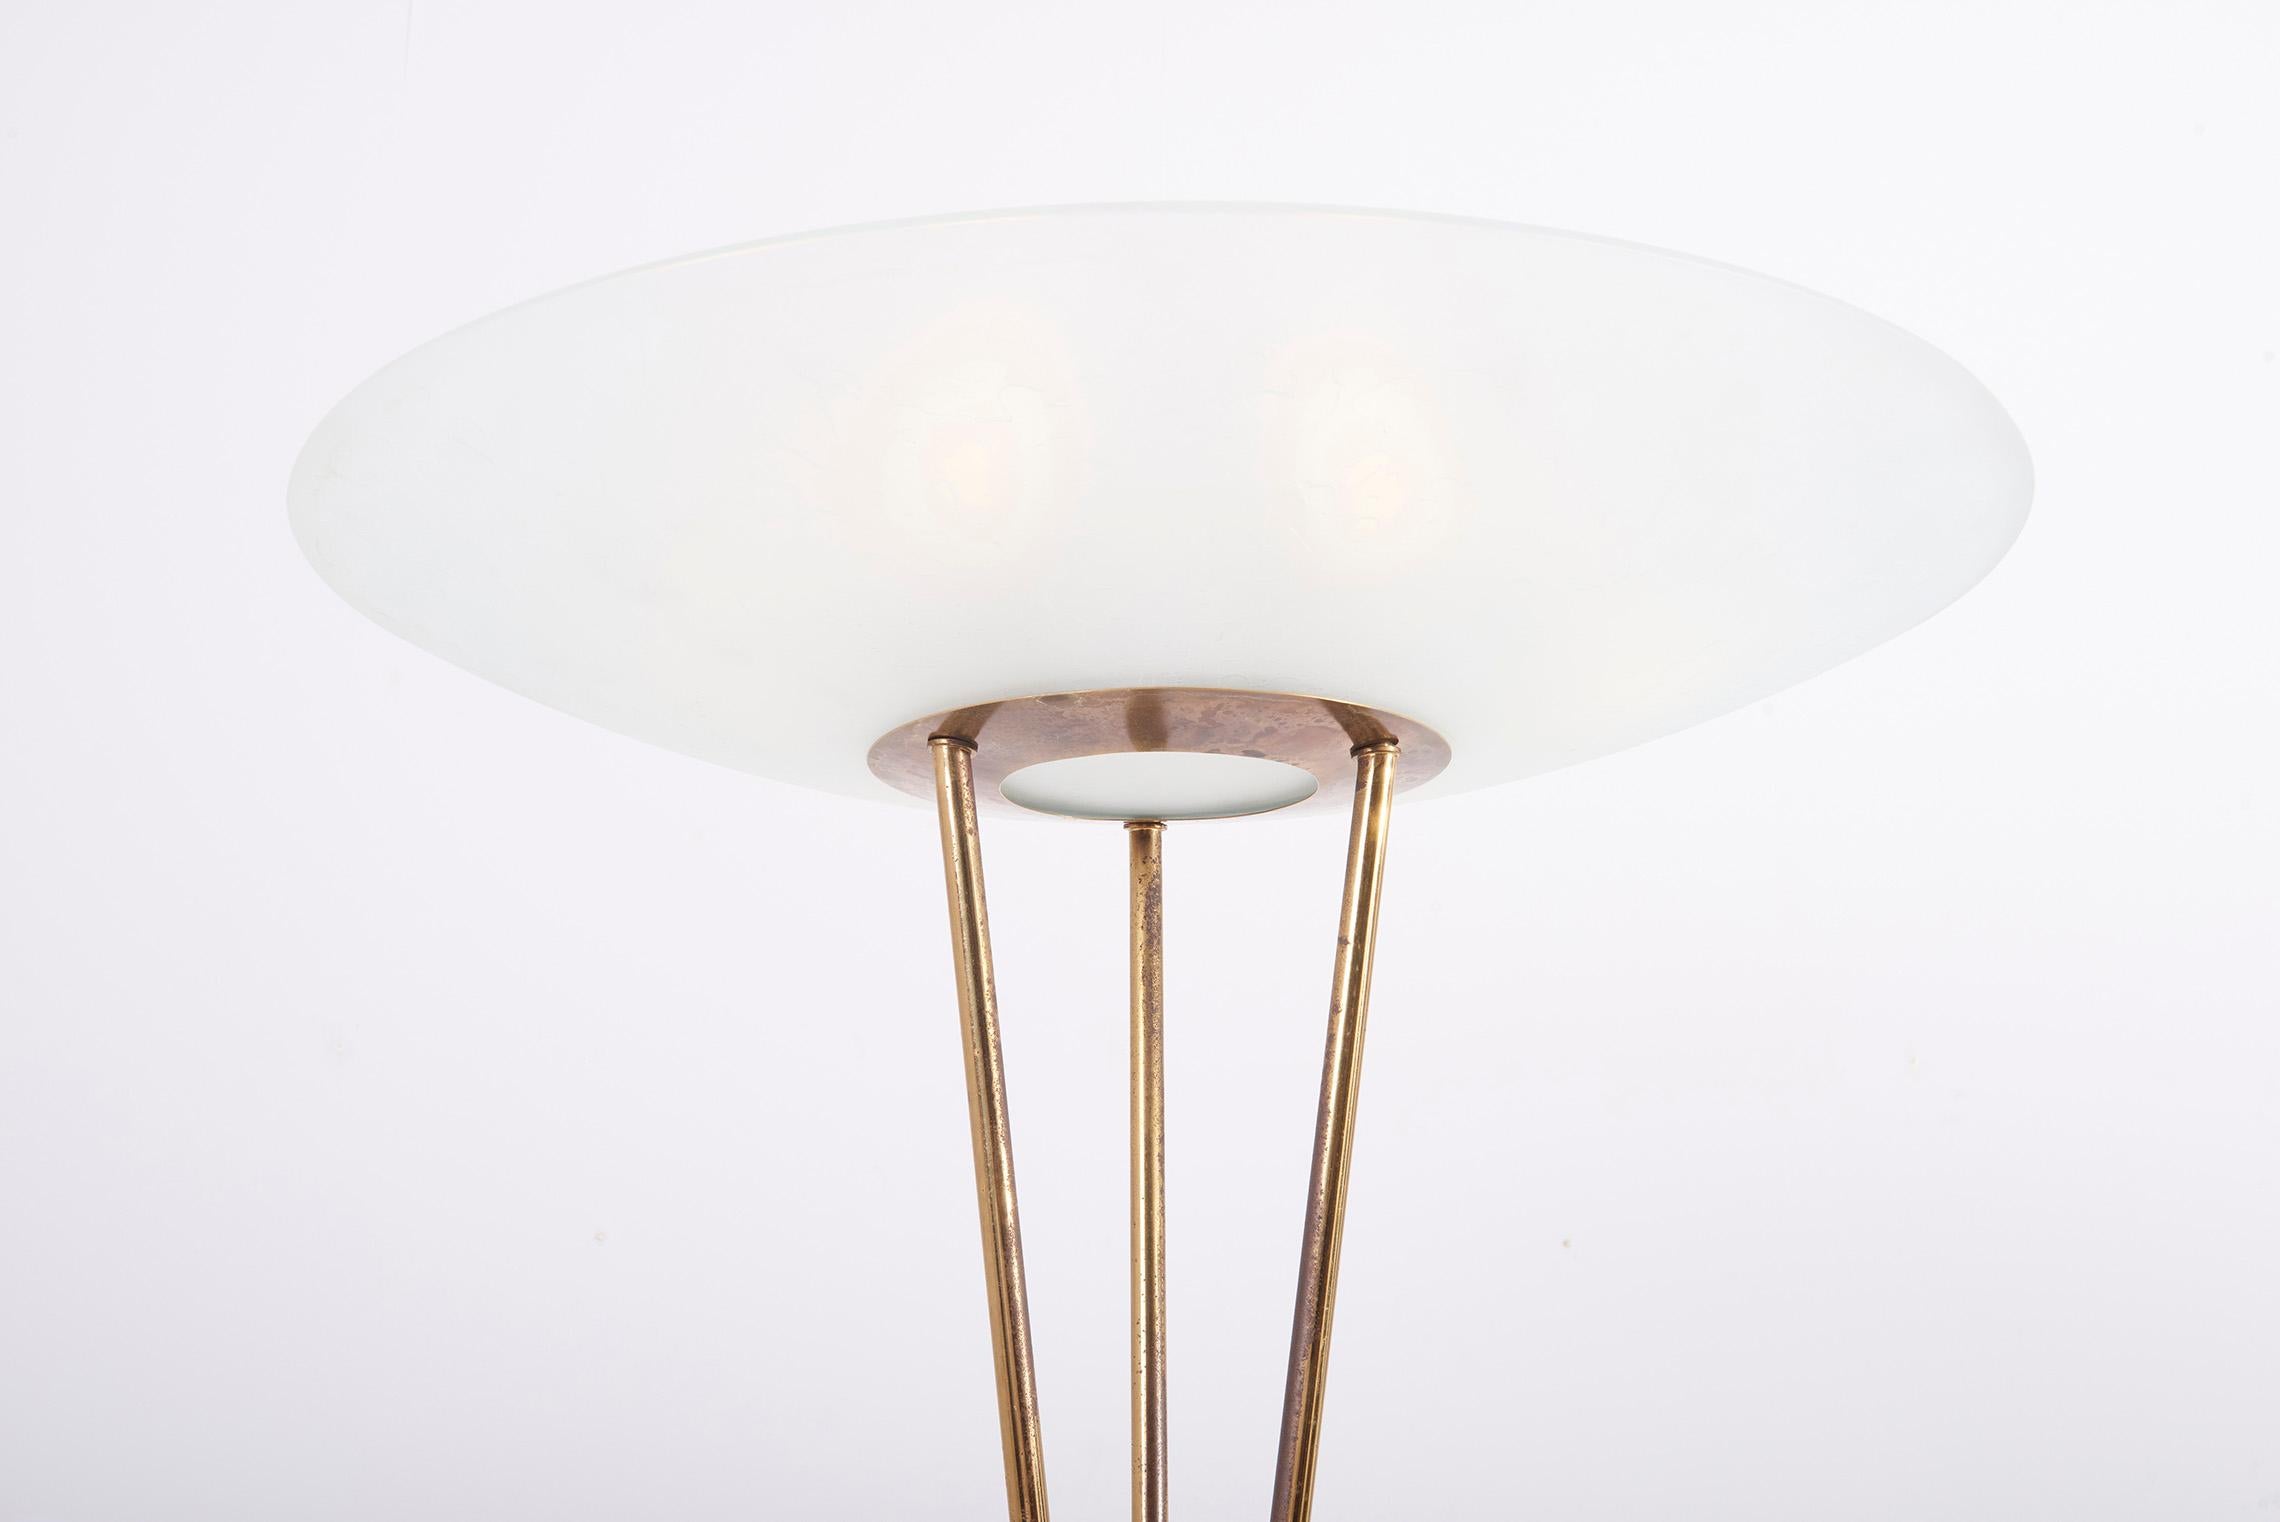 Signed Stilnovo Floor Lamp with Brass and Marble Base, Italy, 1950s For Sale 8